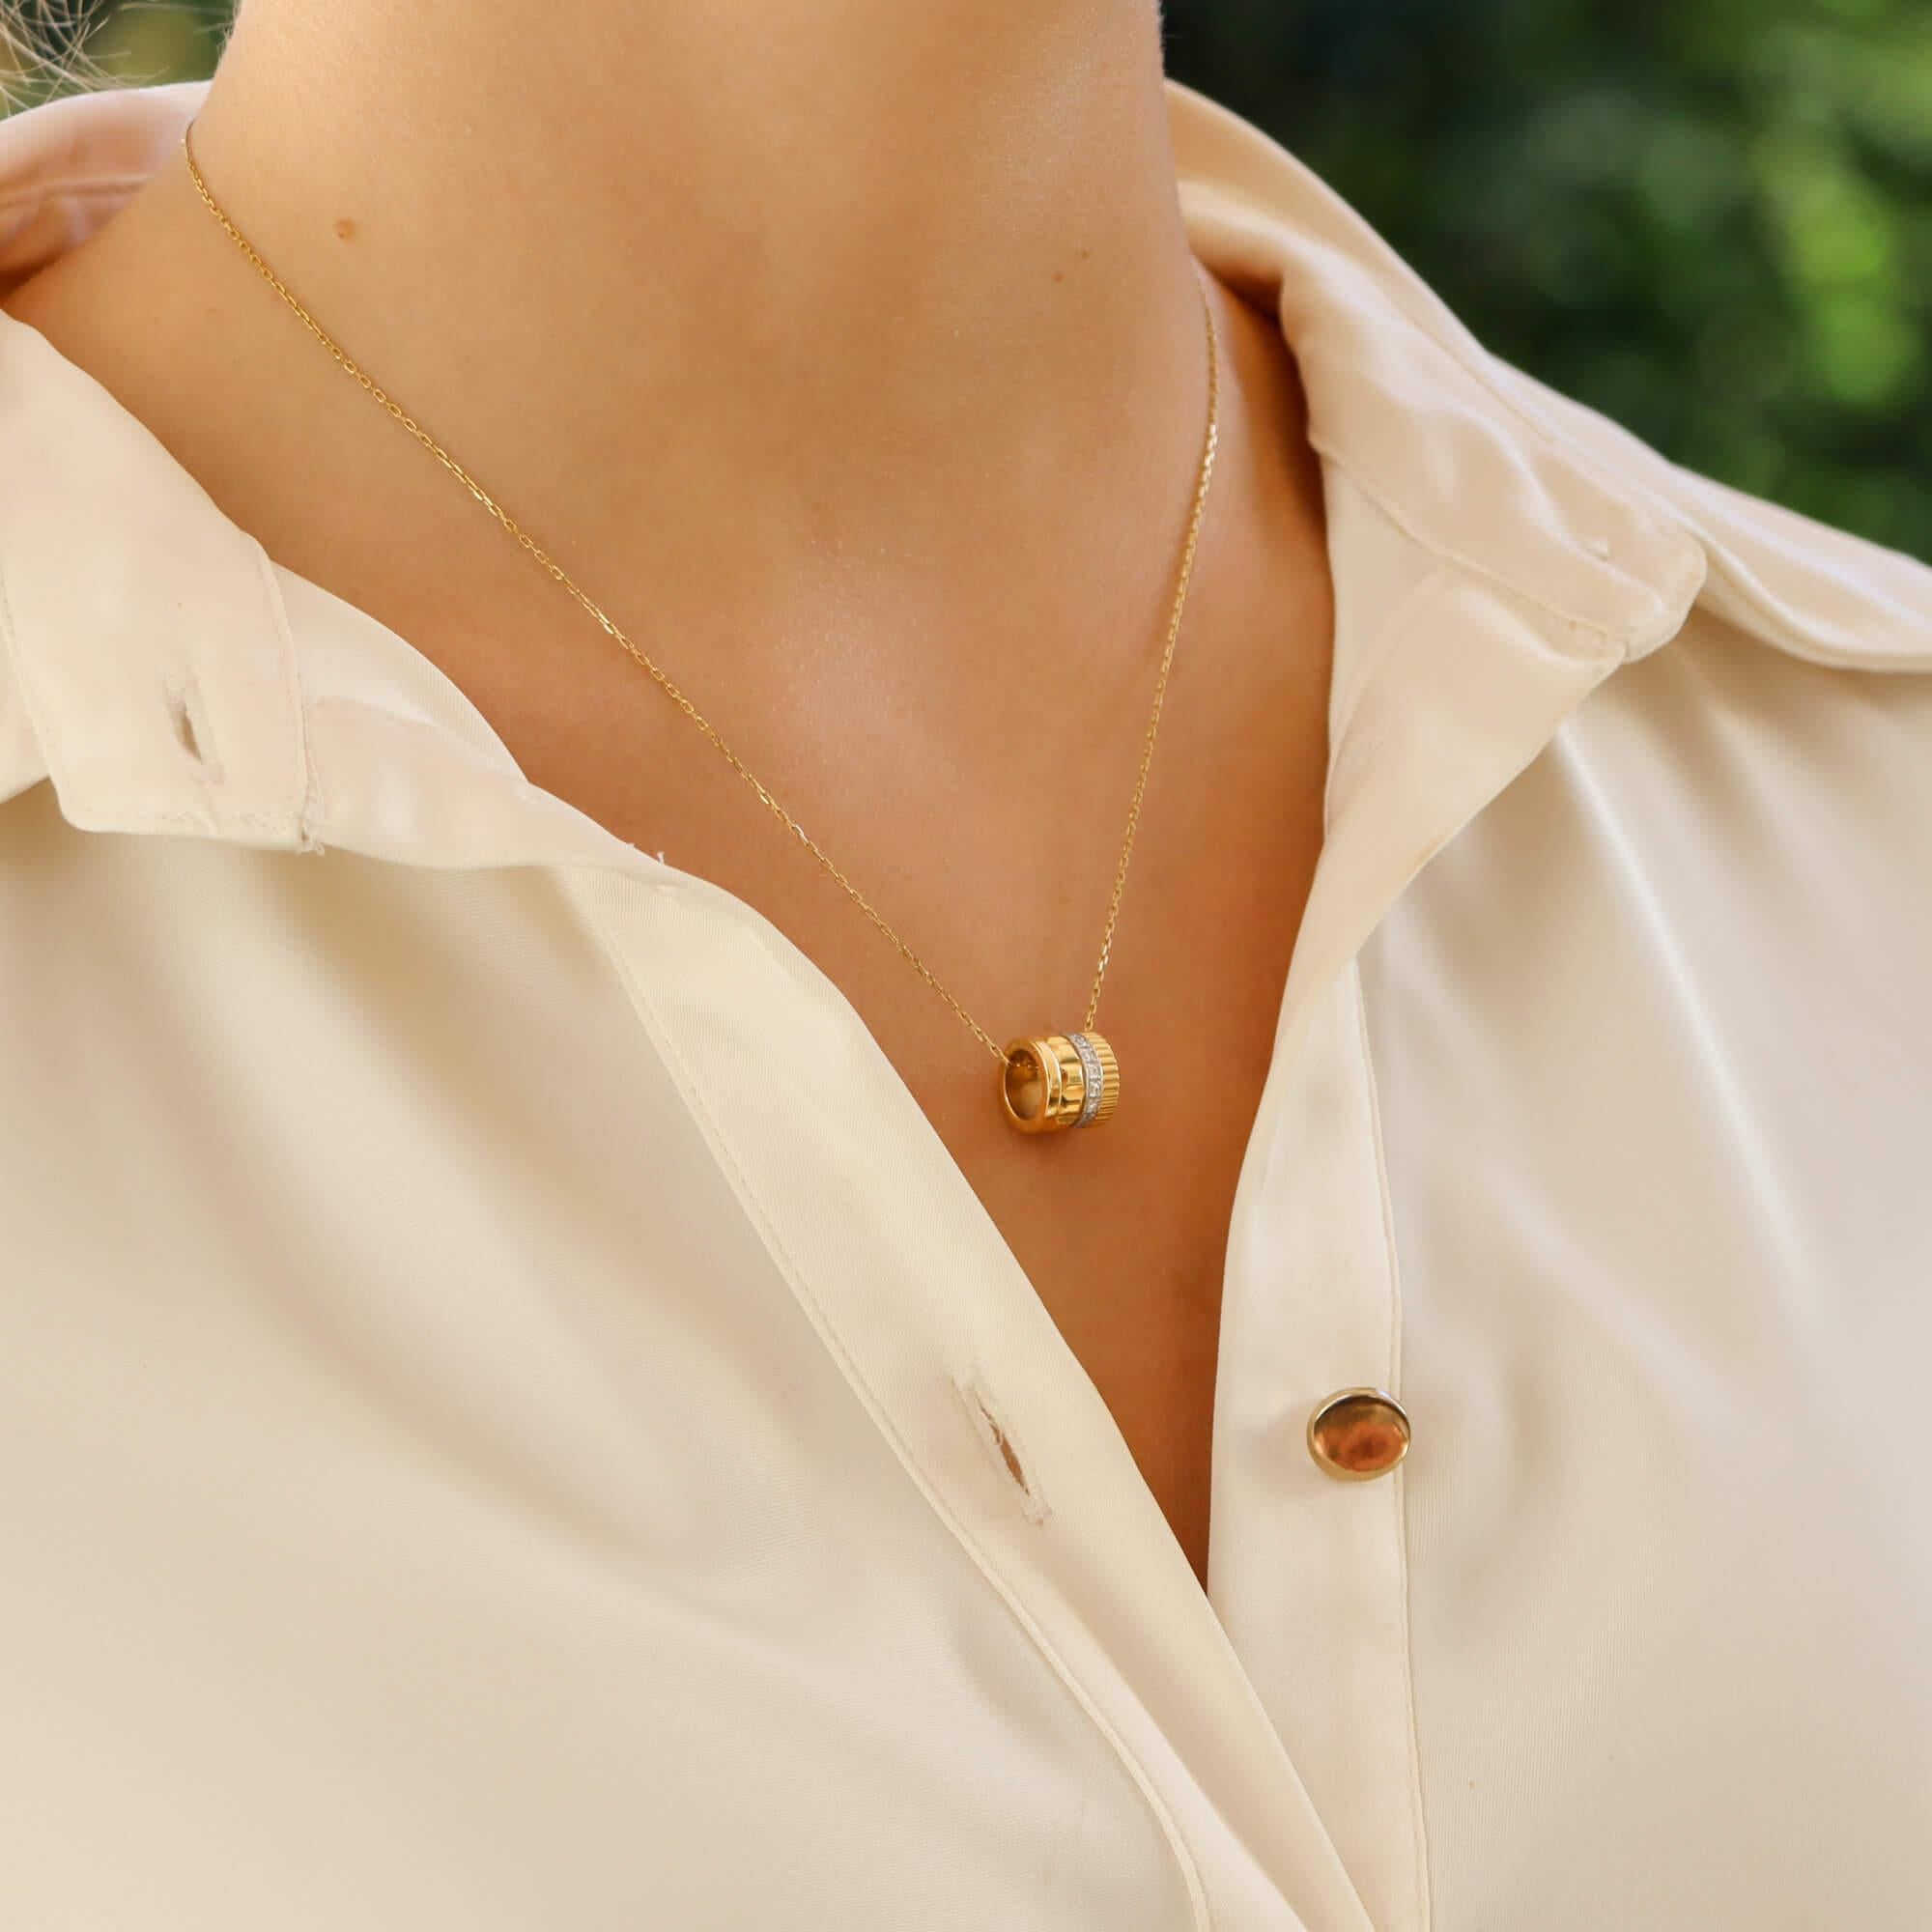 A stylish vintage Boucheron ‘Quatre Classique’ pendant necklace set in 18k yellow gold.

The pendant is a discontinued design in the current Boucheron Quarte Classique collection. This is the largest model and consists of four panels to signify the